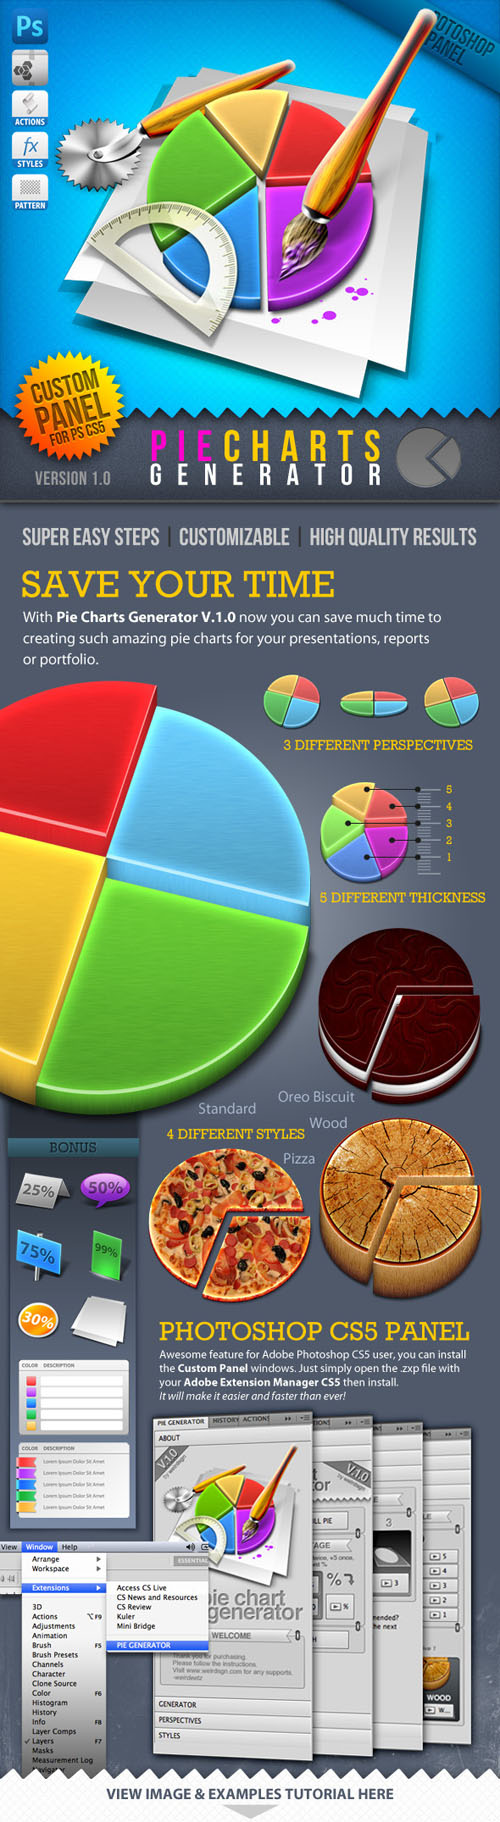 GraphicRiver - Infographic Tool Series: 3D Pie Charts Generator 888921